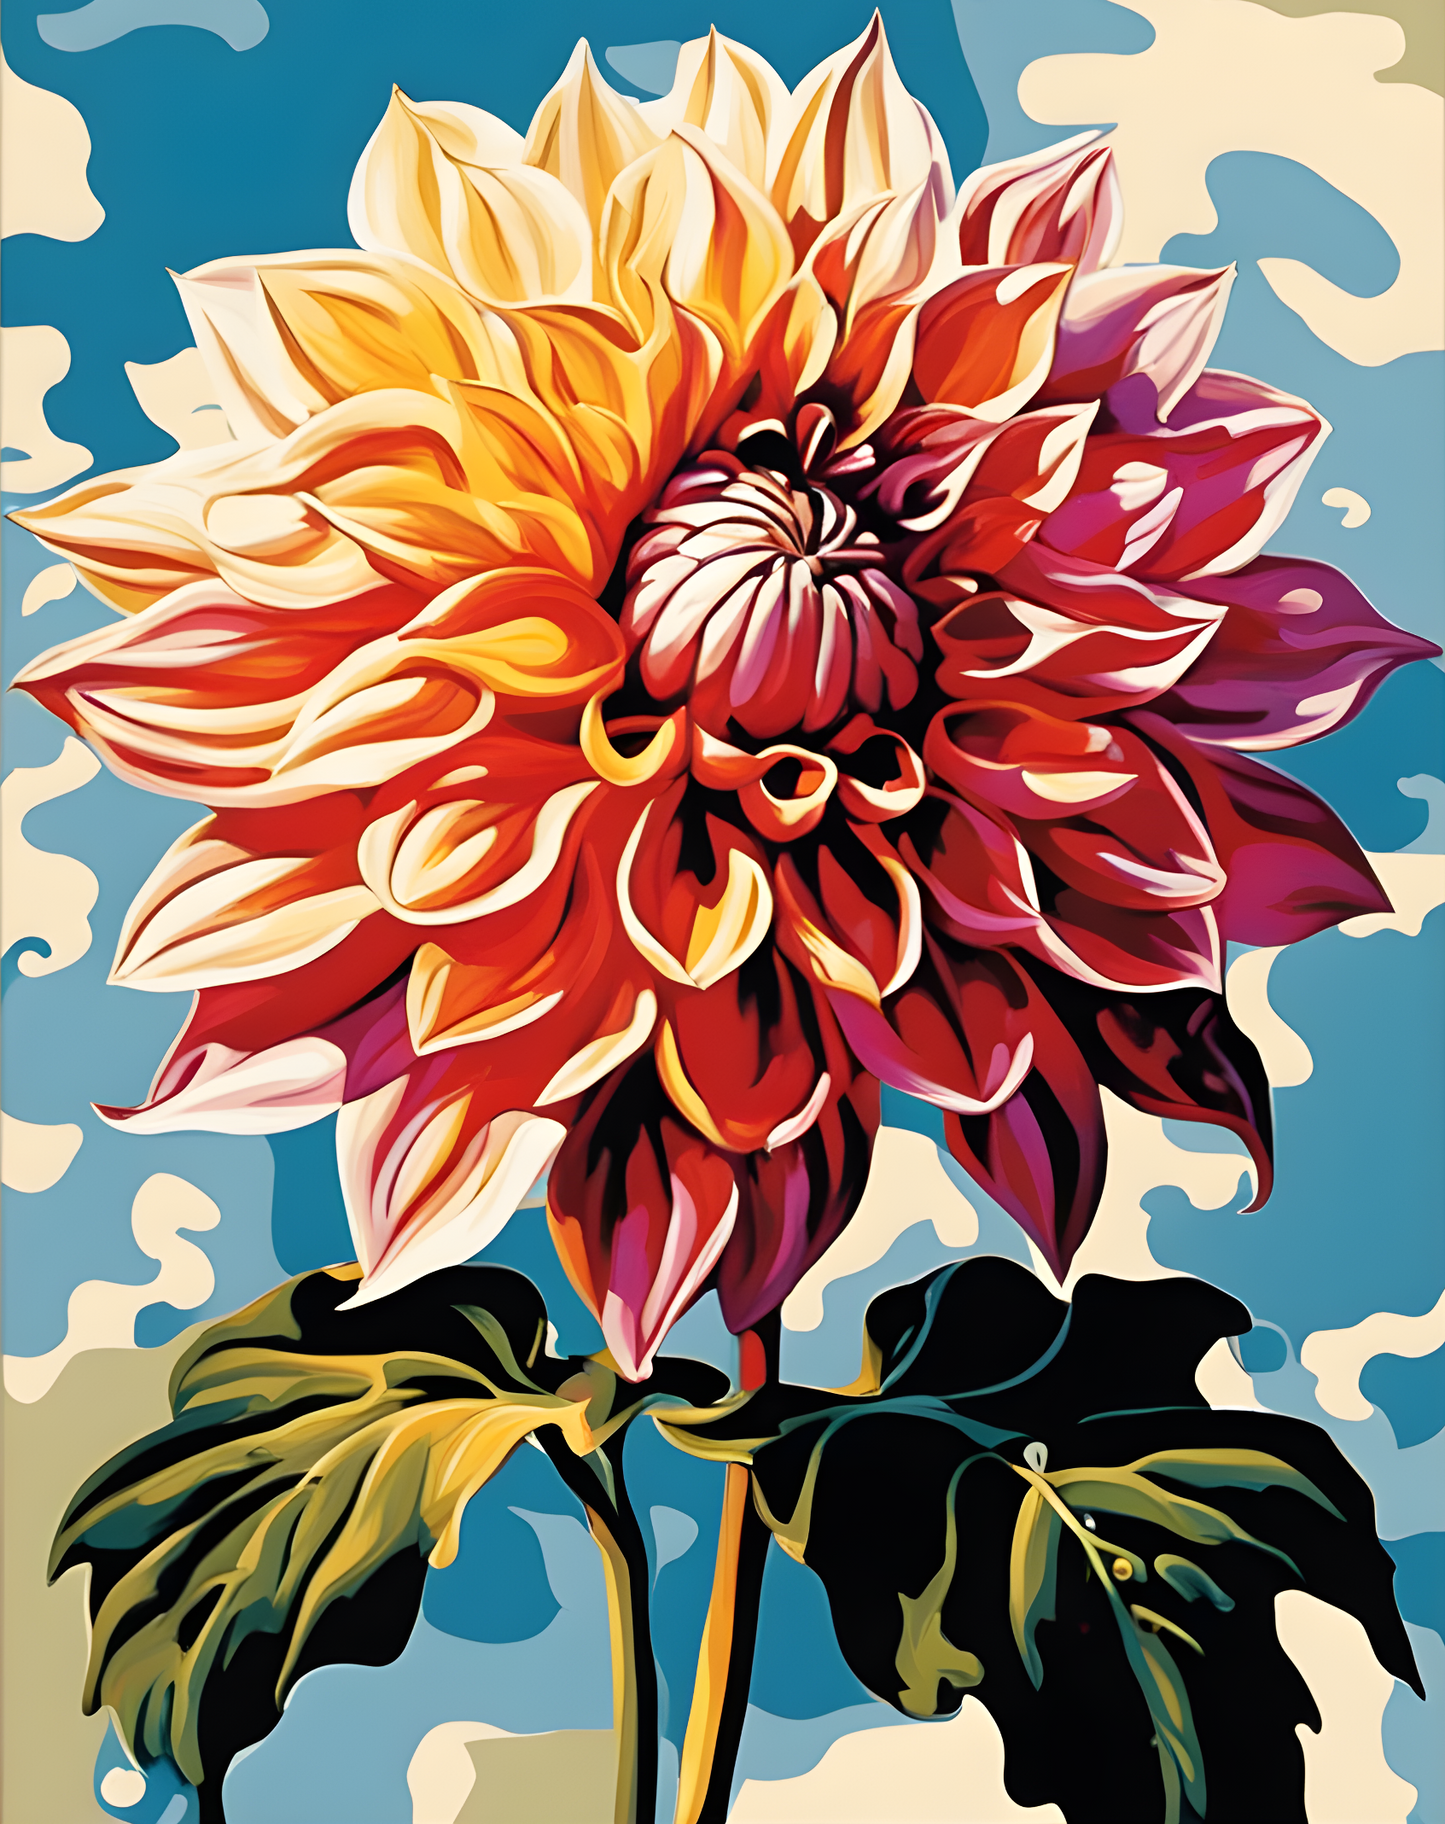 Flowers Collection OD (54) - Dahlia - Van-Go Paint-By-Number Kit